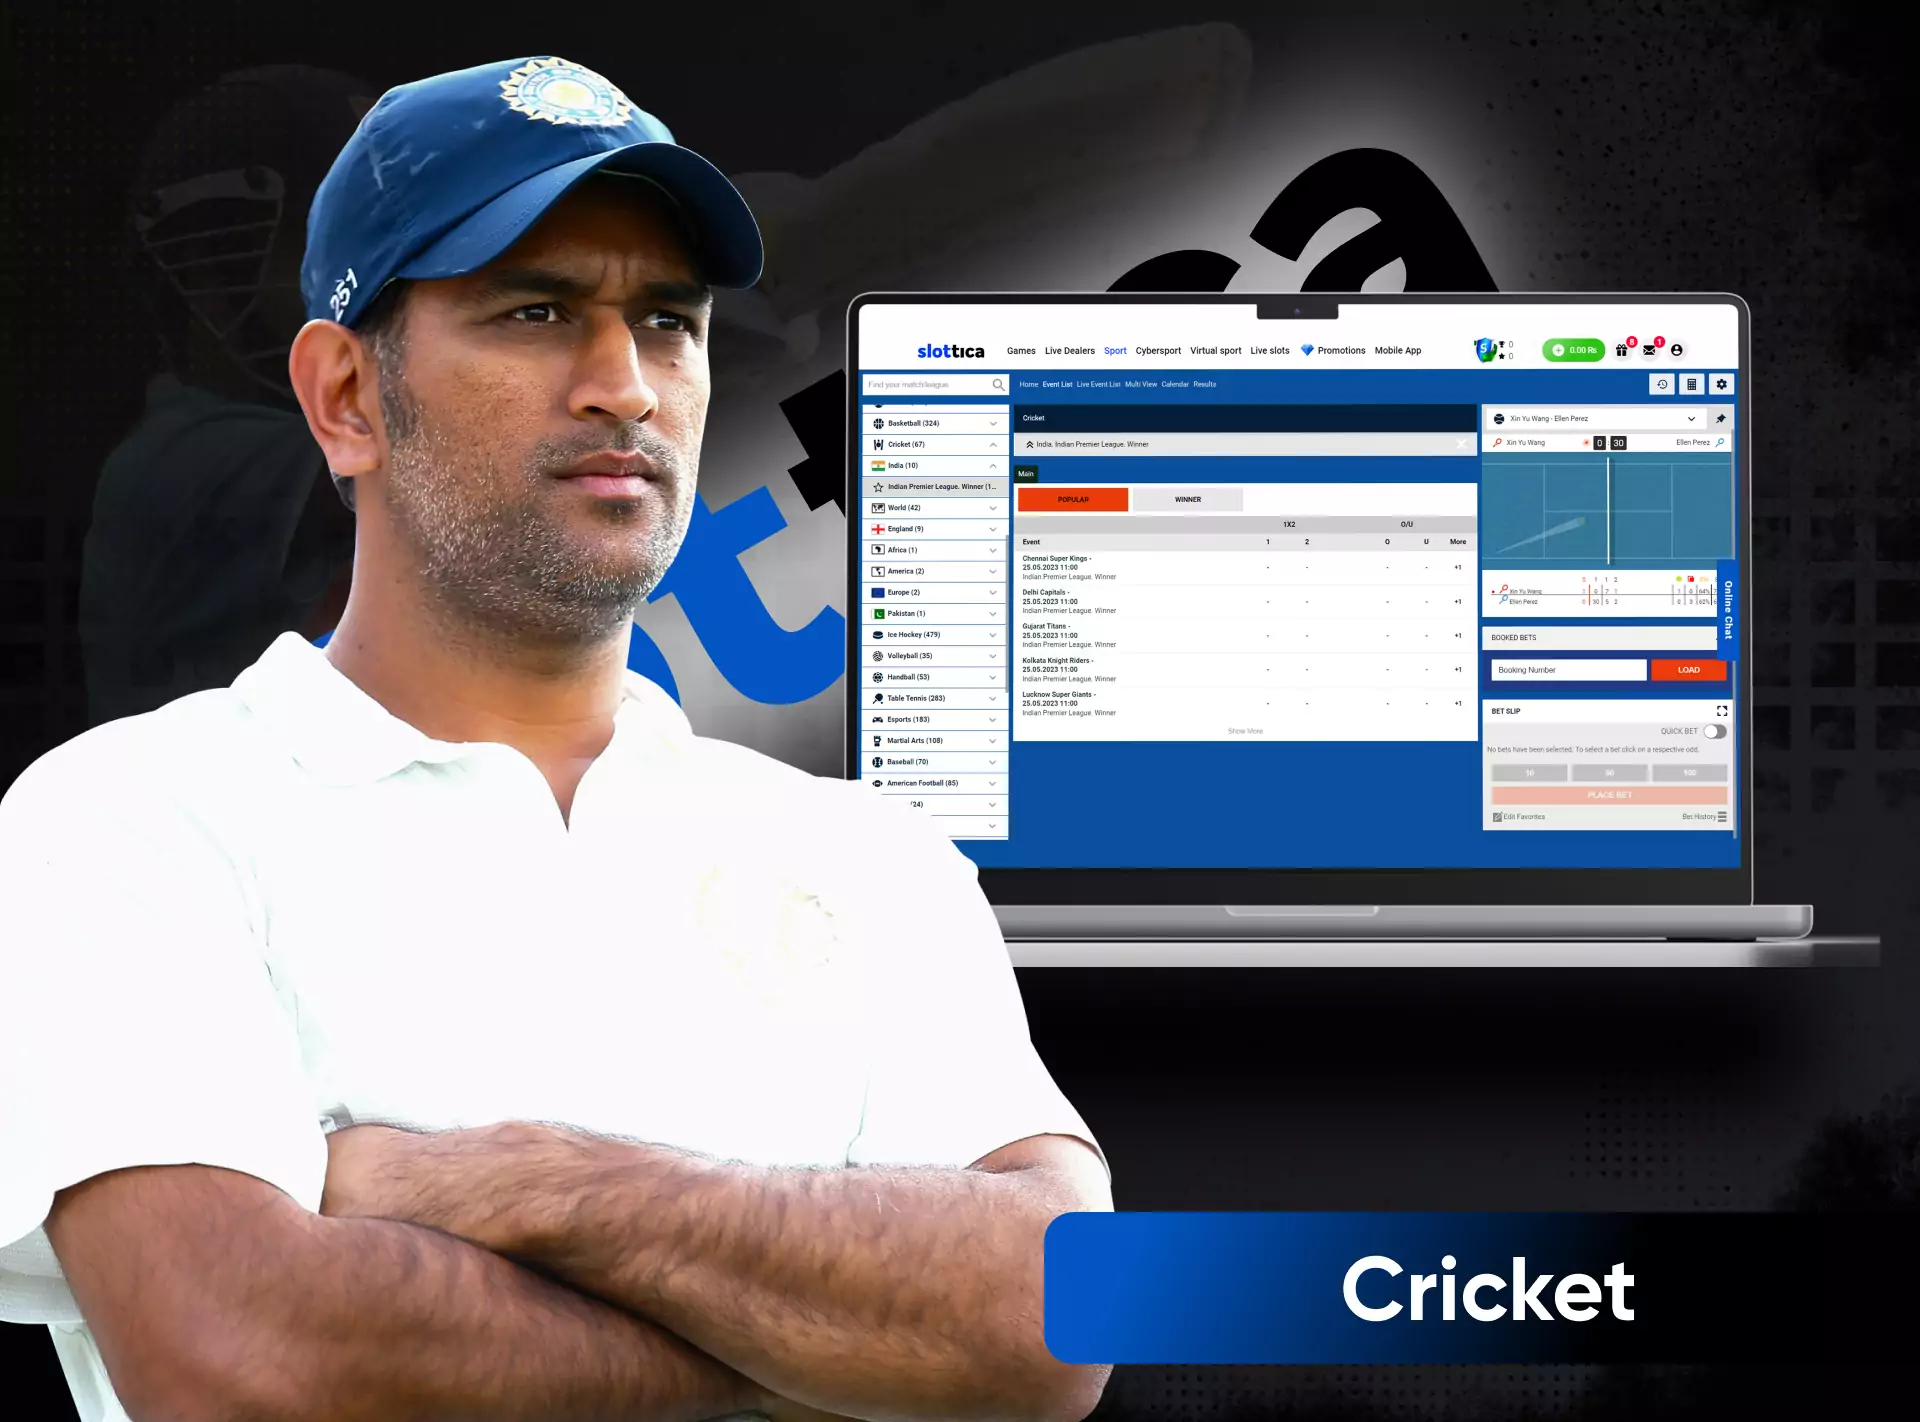 On the Slottica website, cricket fans bet on matches online.